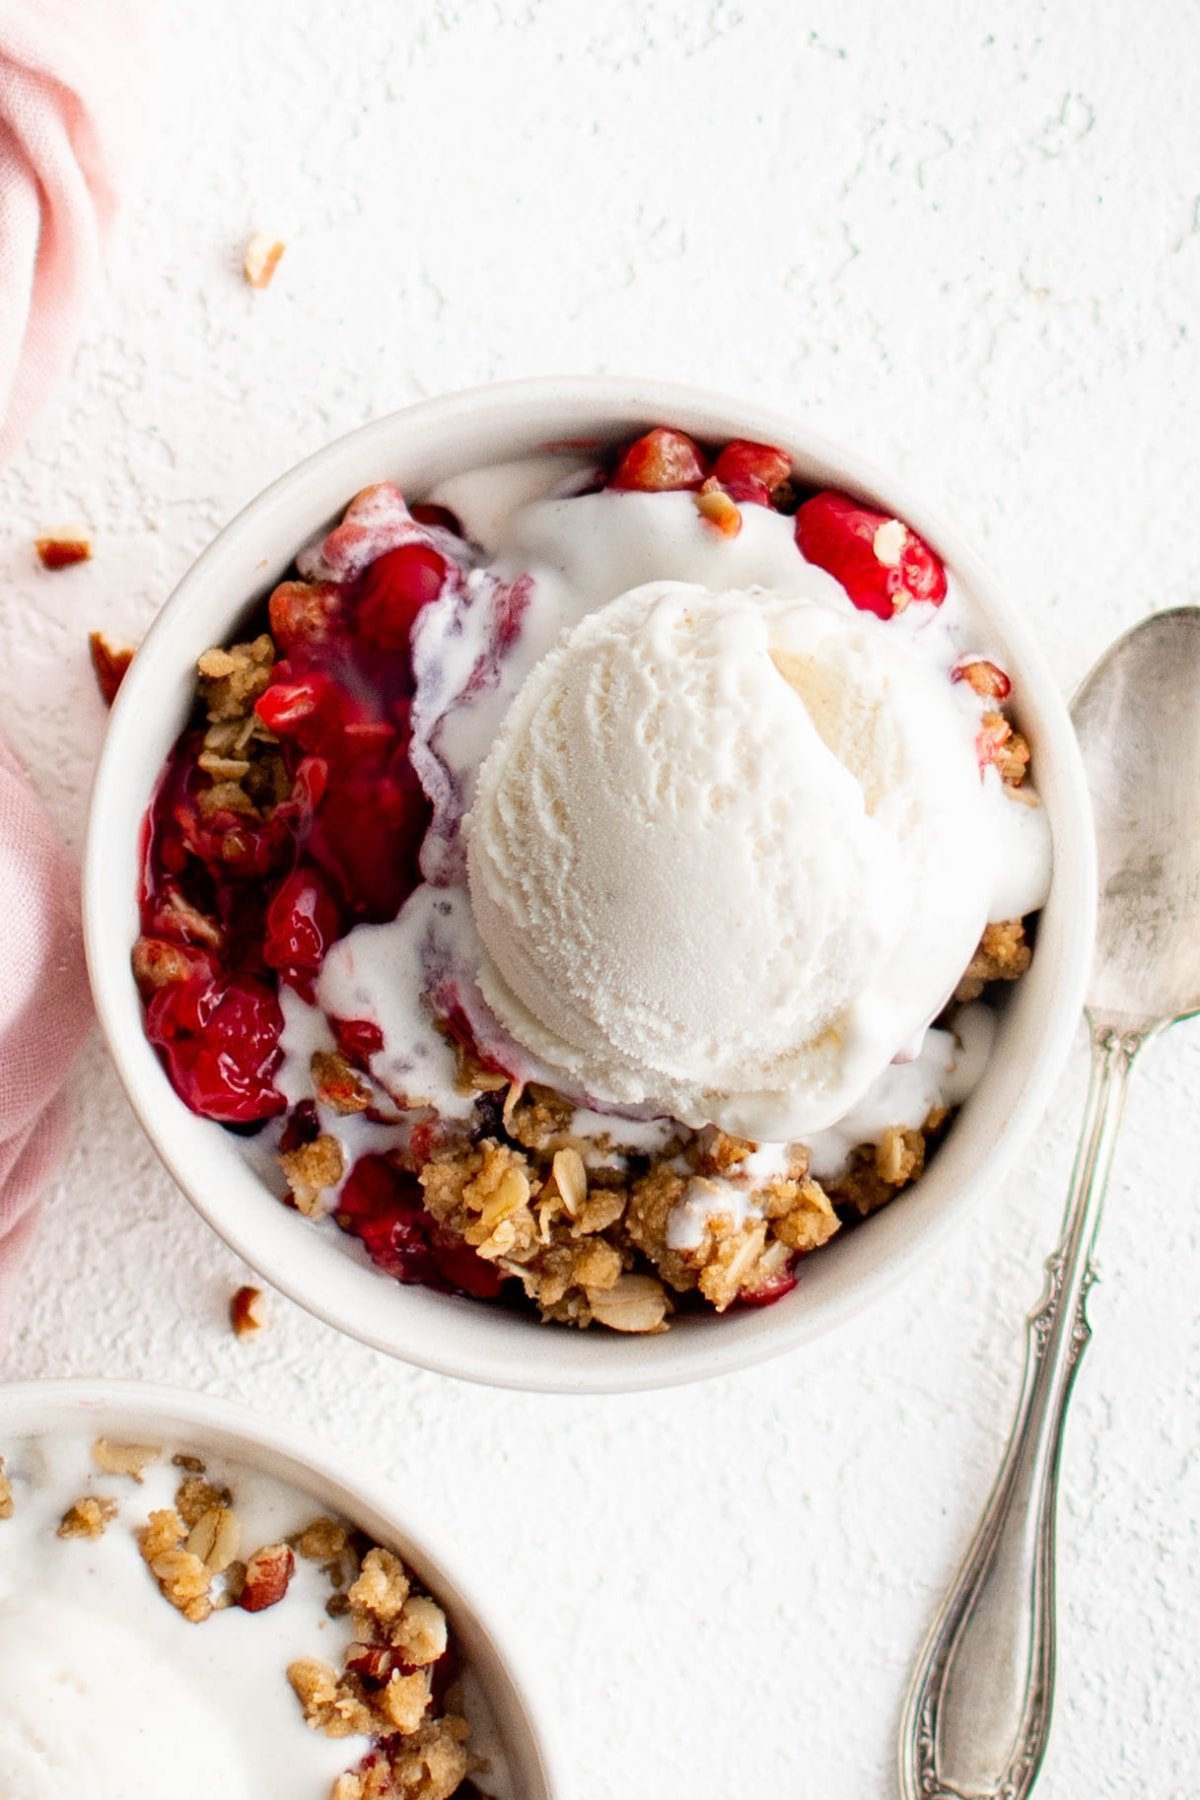 Cherry crisp with a scoop of vanilla ice cream in a small bowl.